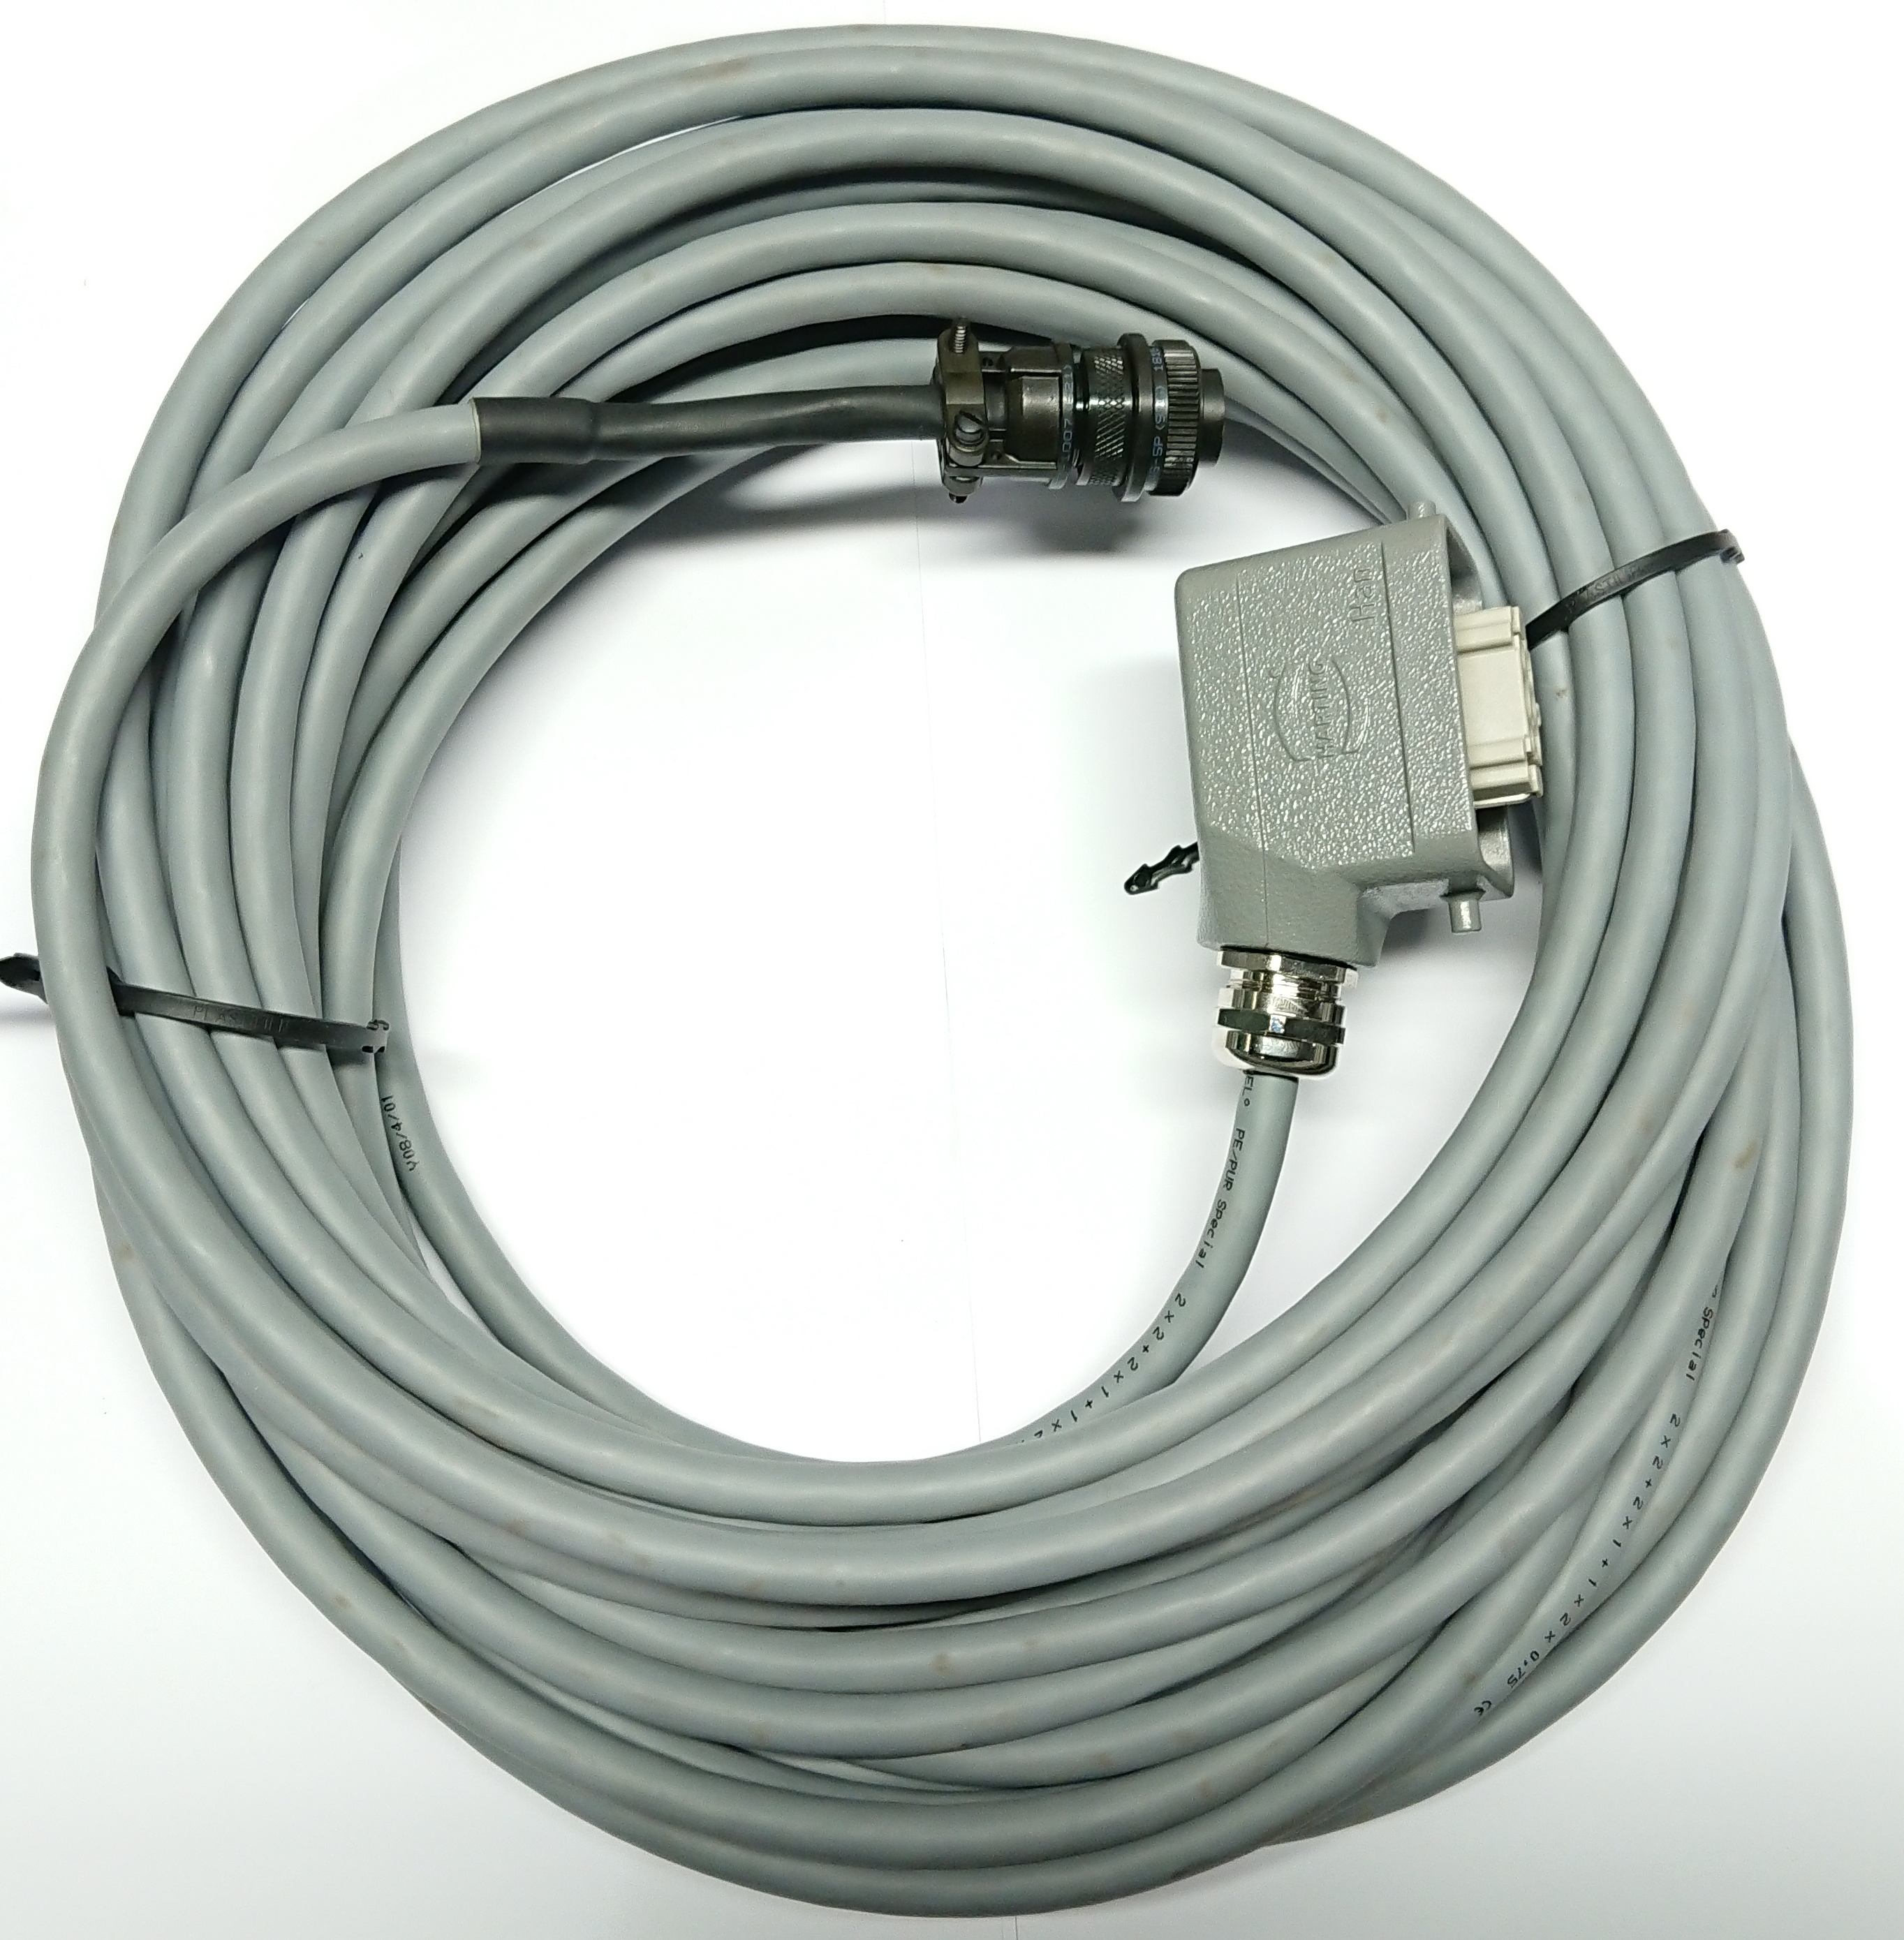 CAN-kabel, R360